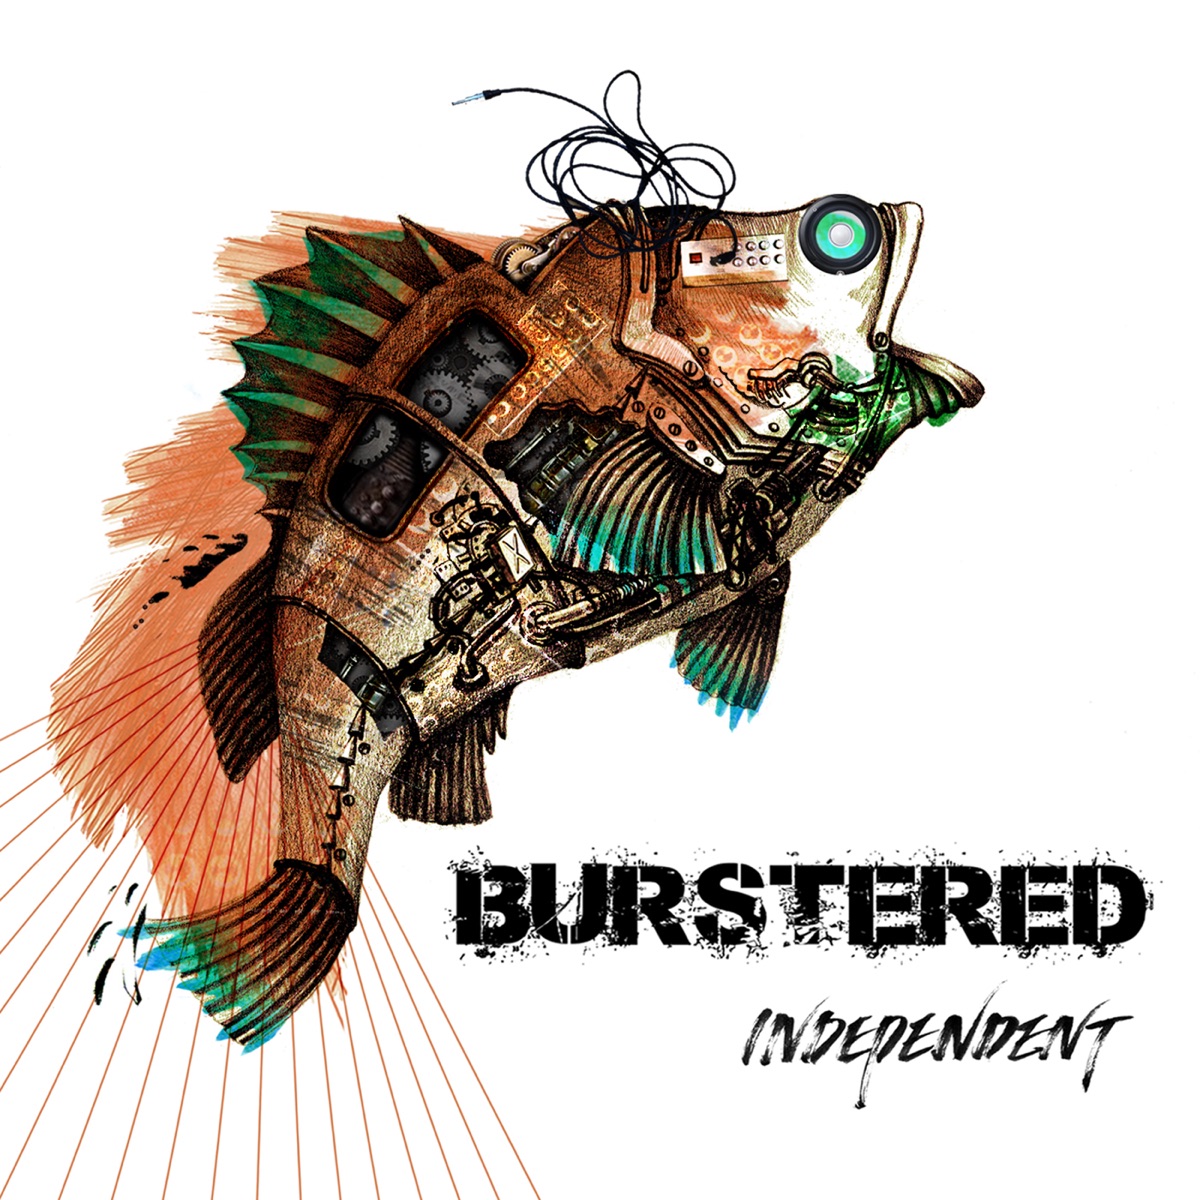 BURSTERS – Independent – EP